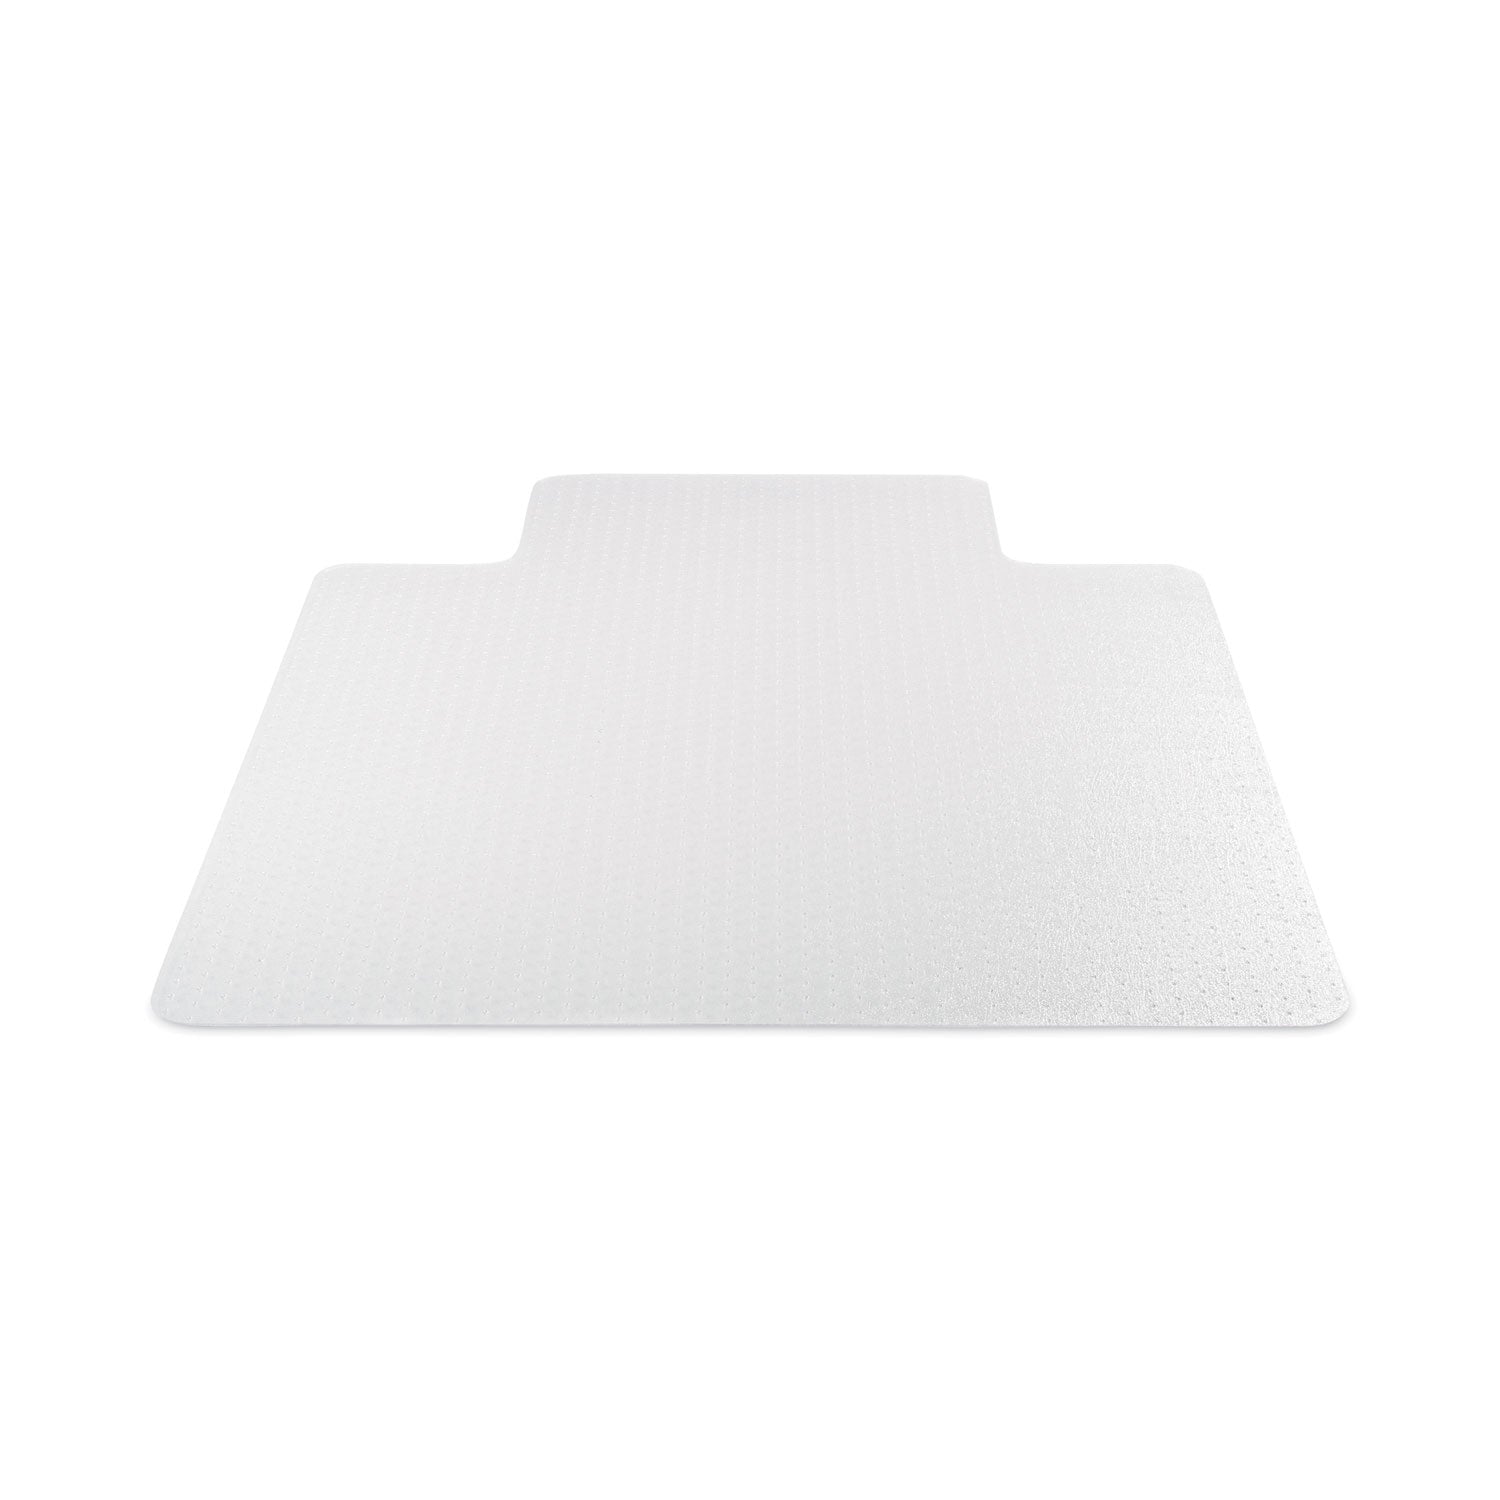 supermat-frequent-use-chair-mat-for-medium-pile-carpet-46-x-60-wide-lipped-clear_defcm14432f - 6